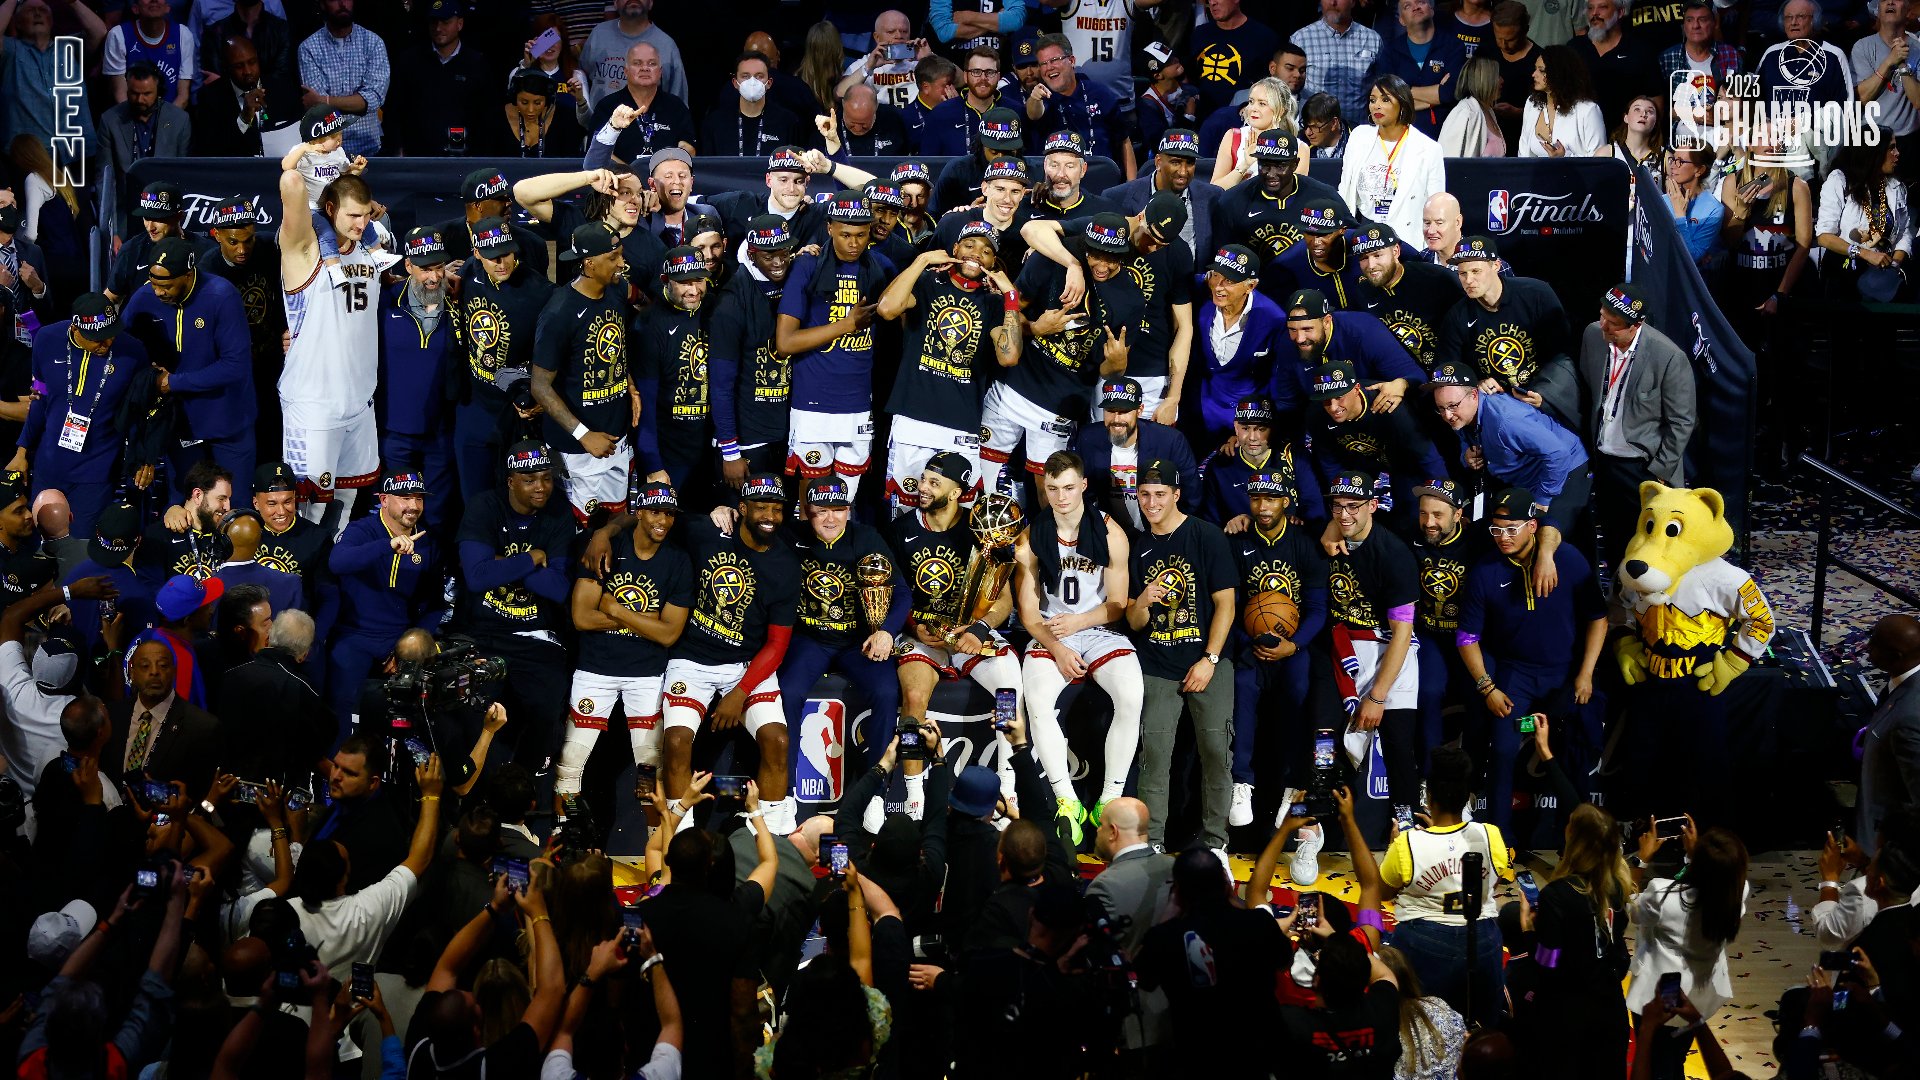 The Denver Nuggets made history by winning the 2023 NBA Championship